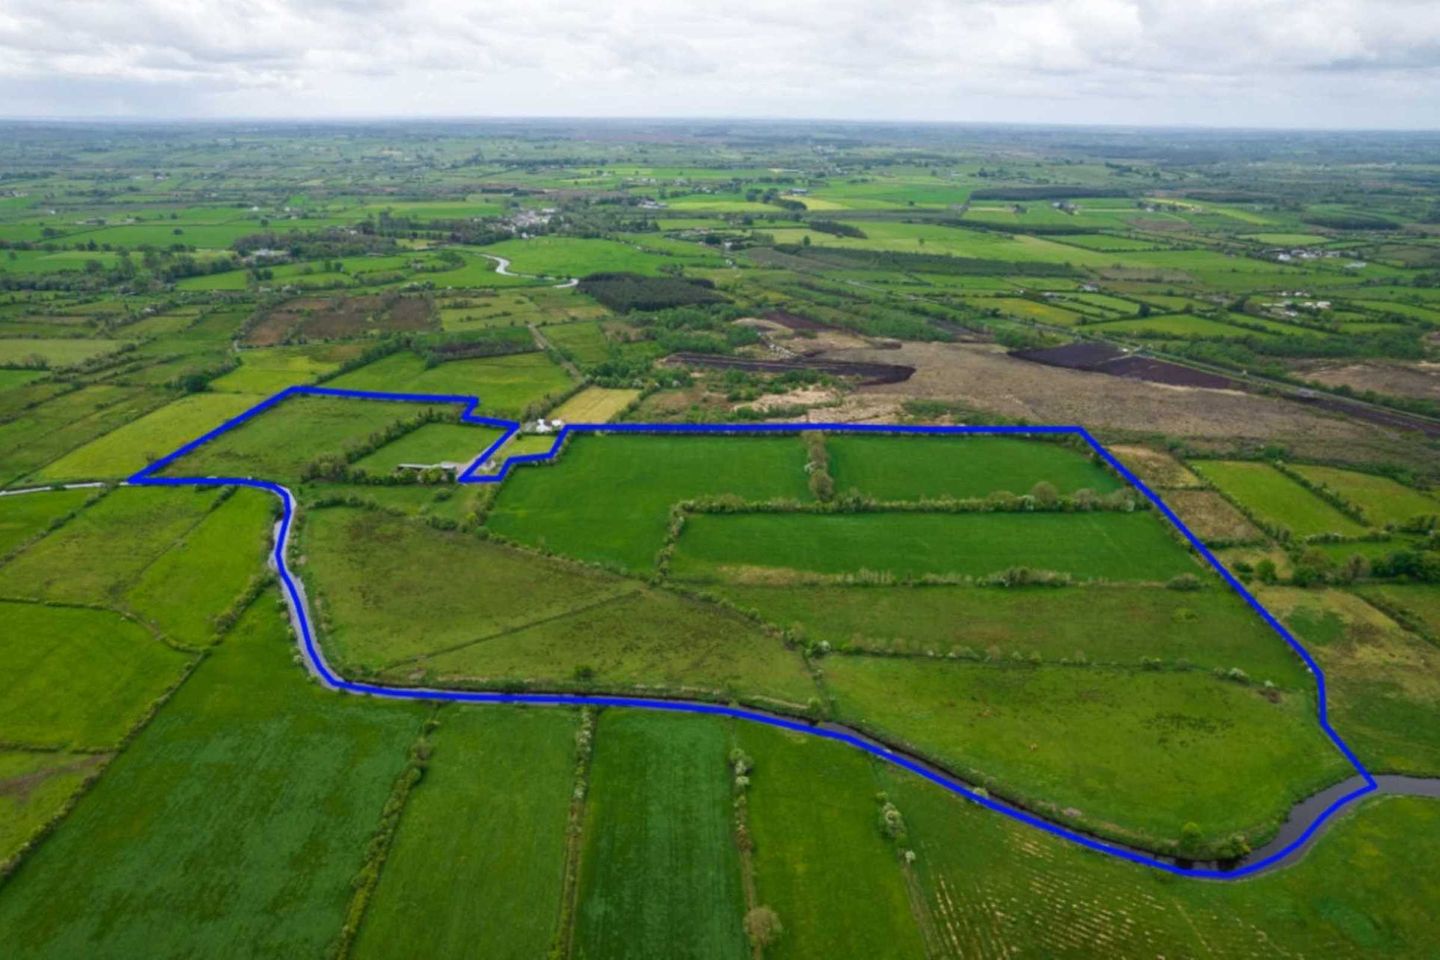 c.47 Acres with Farm Buildings at Cloonadarragh, Ballymoe, Co. Galway